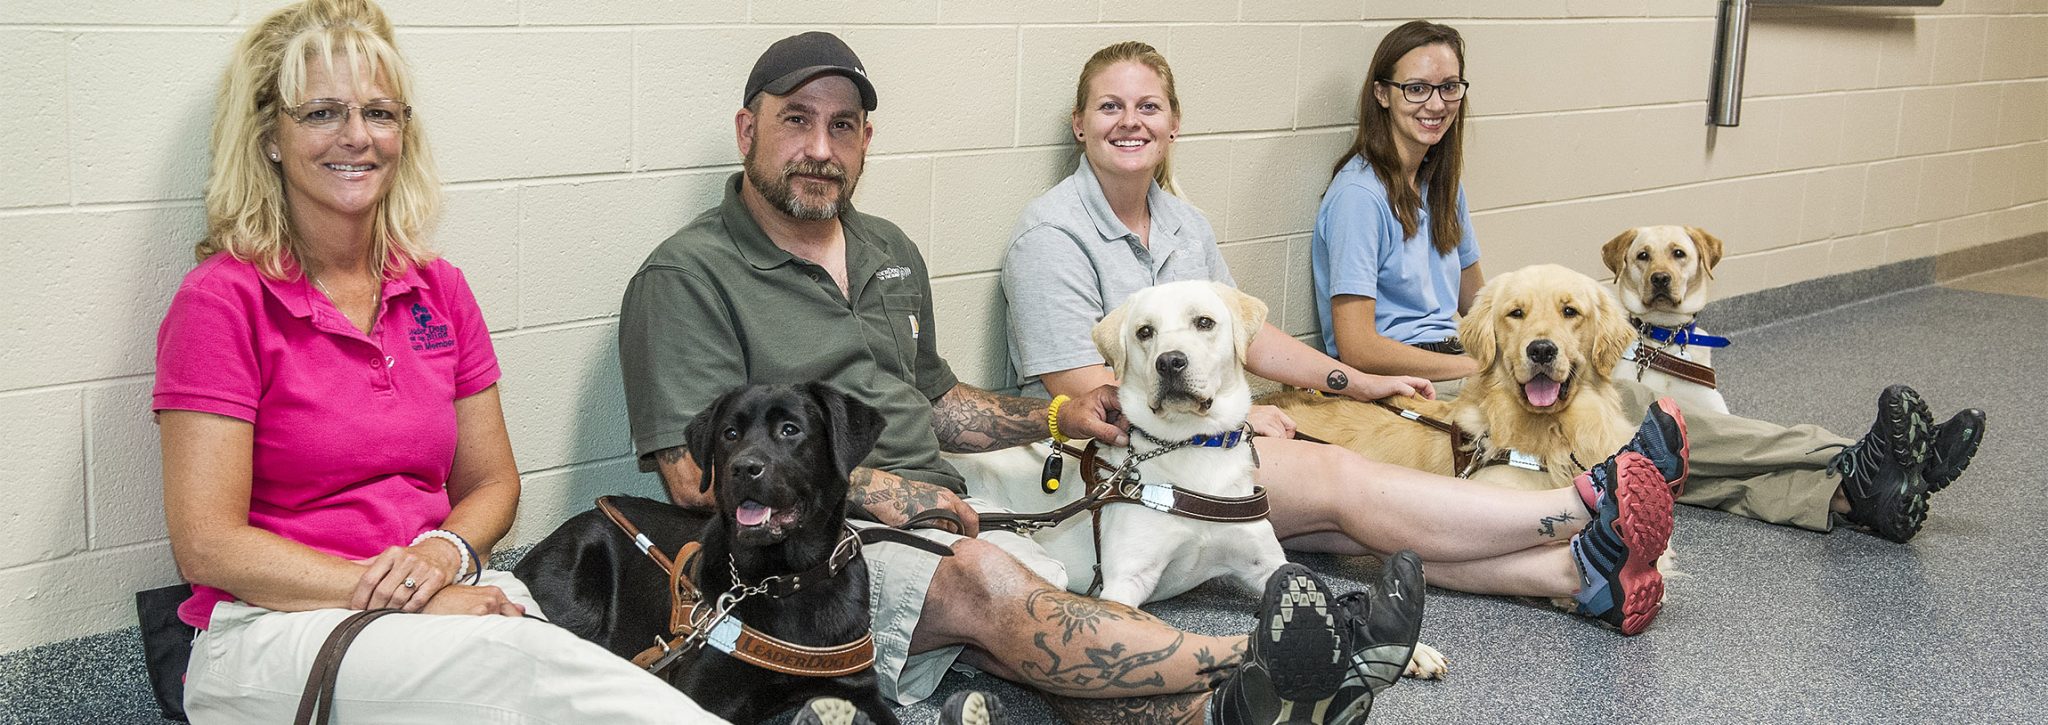 Four Leader Dog instructors, three women and one man, sit with legs outstretched on the floor in a hallway. Beside each one of them is a lab or golden retriever in harness